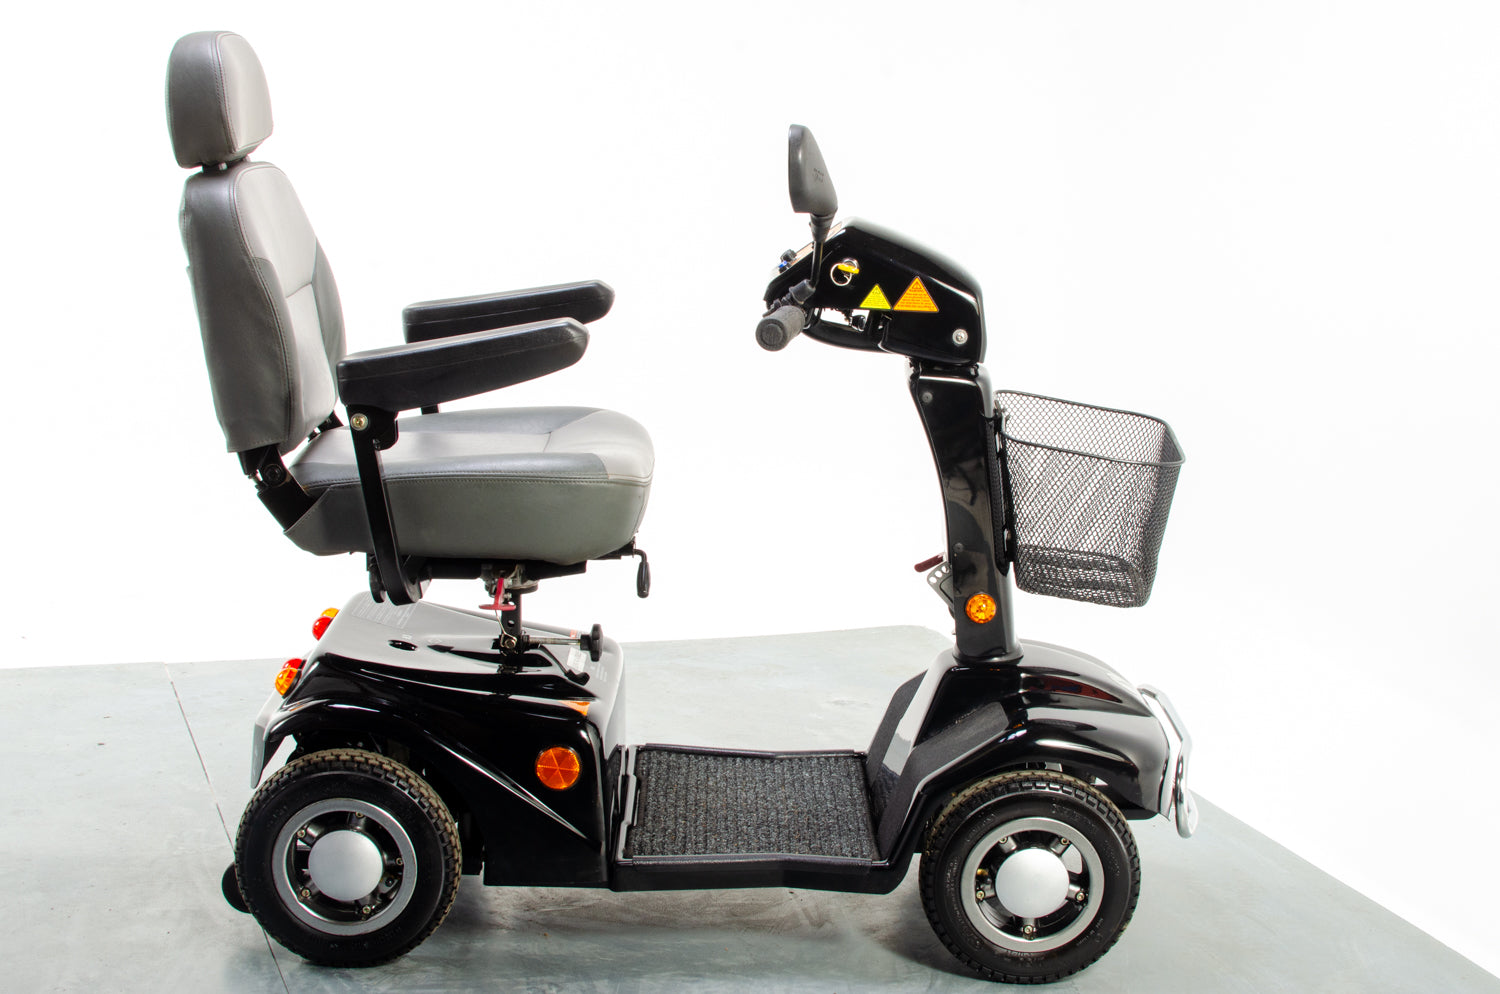 Rascal 388XL Used Electric Mobility Scooter 6mph Pavement Road Class-3 Captain Seat